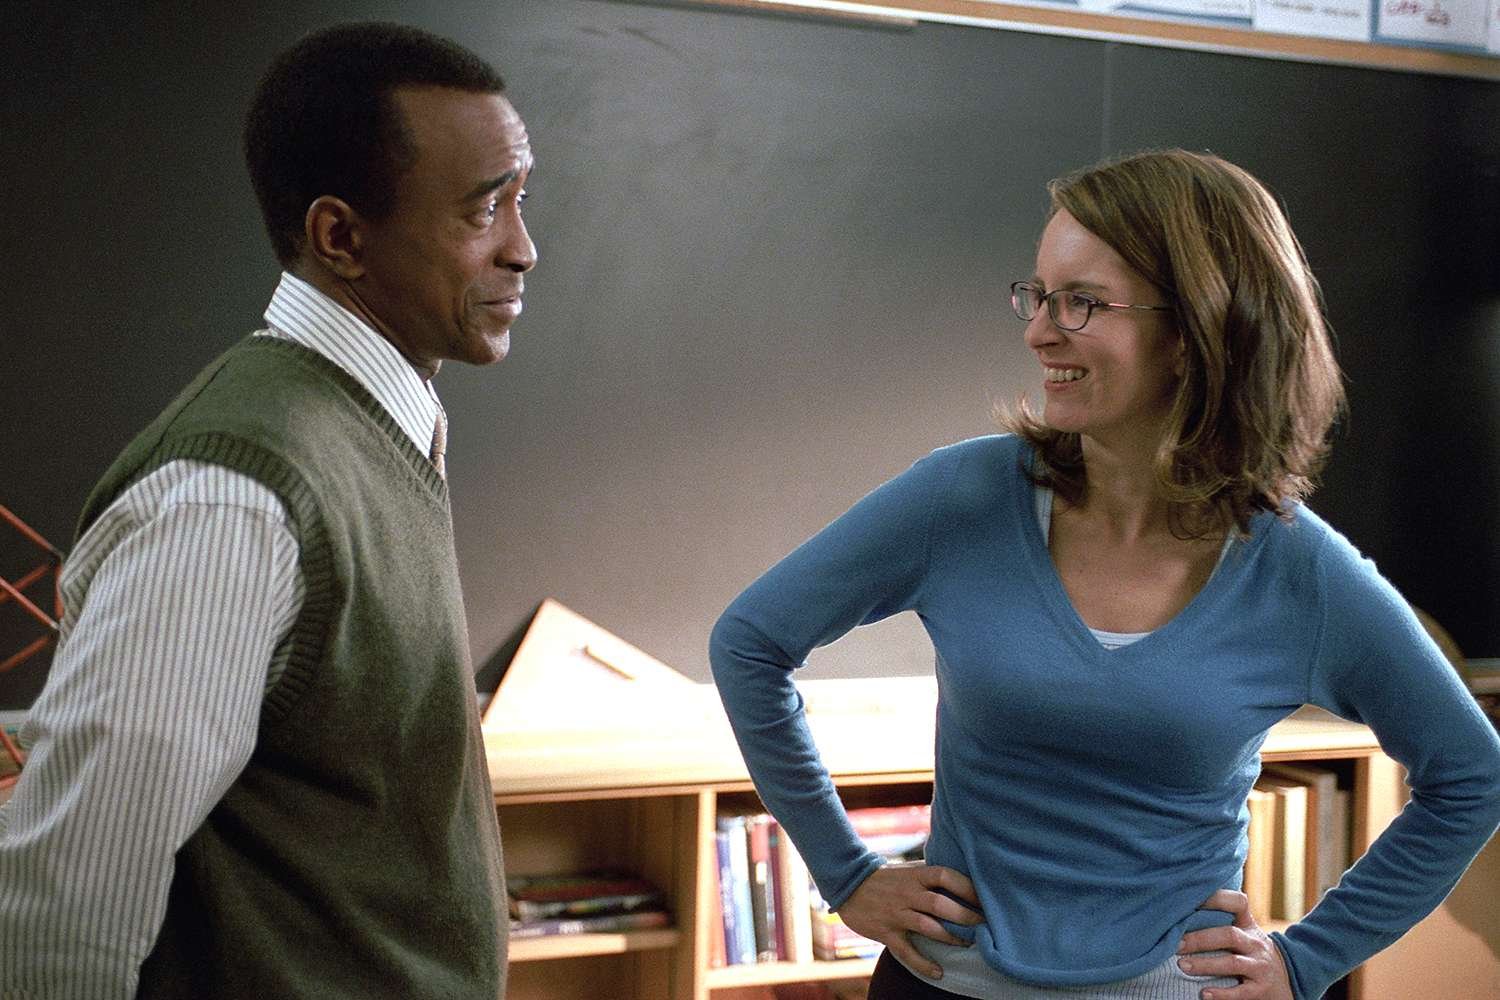 Tina Fey, Tim Meadows to act in ‘Mean Girls: The Musical’? What we know